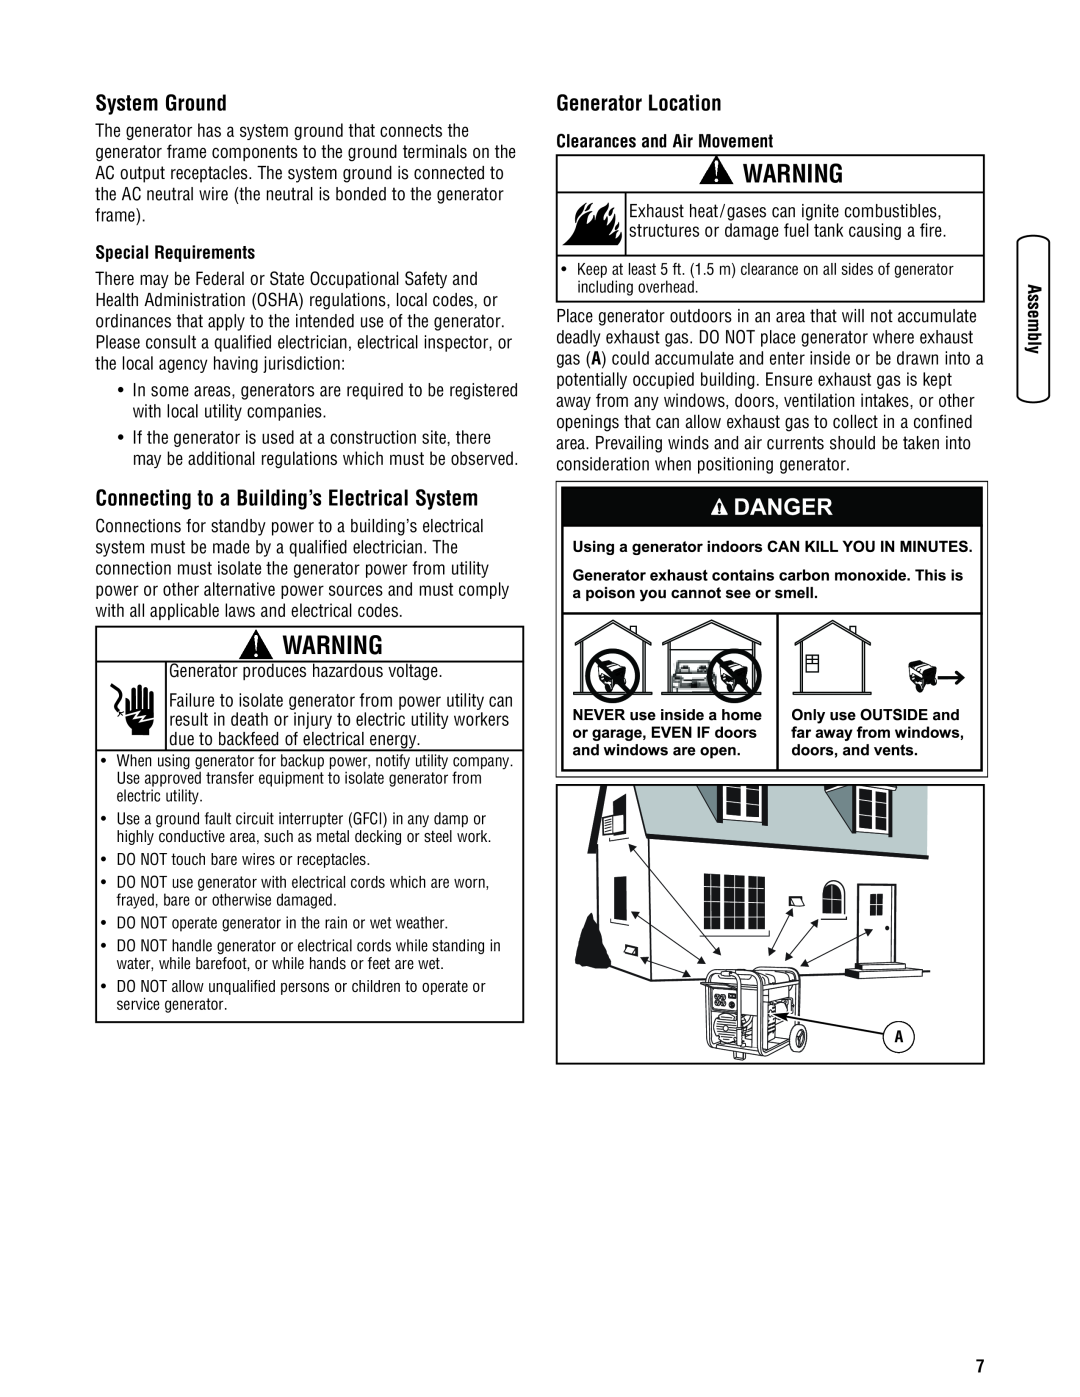 Briggs & Stratton 30348 manual System Ground, Connecting to a Building’s Electrical System, Generator Location 